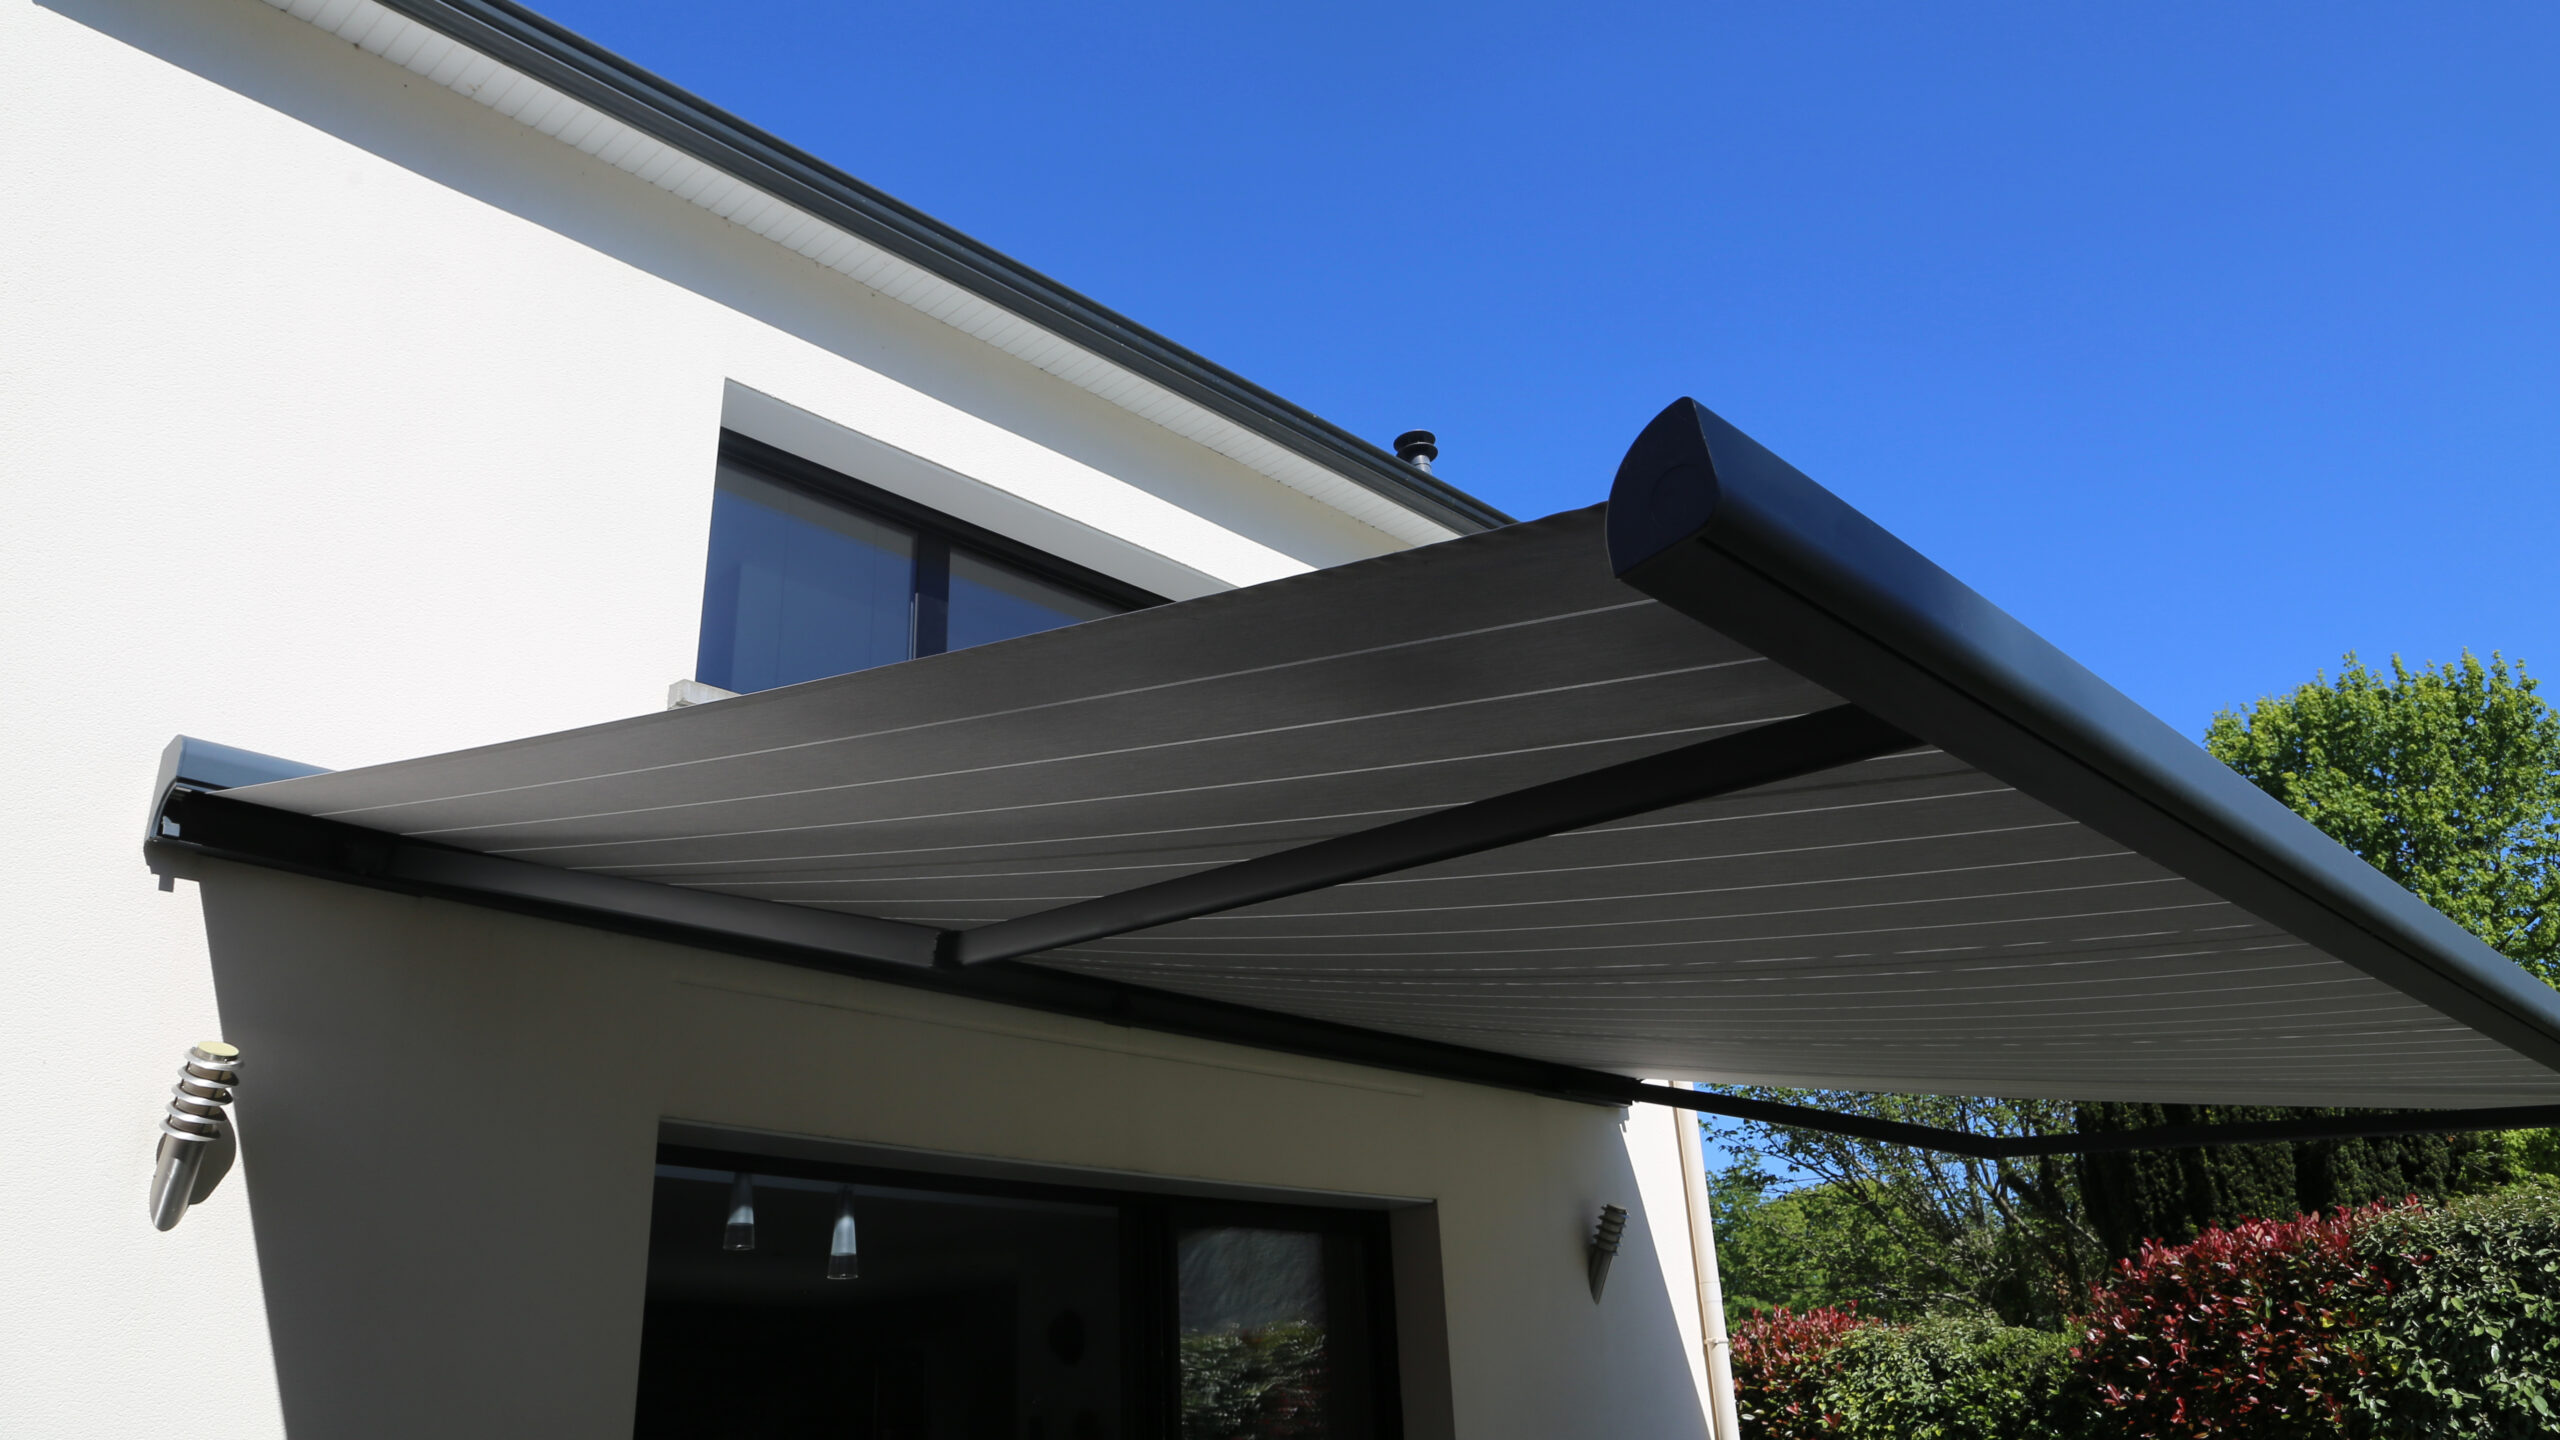 A retractable awning